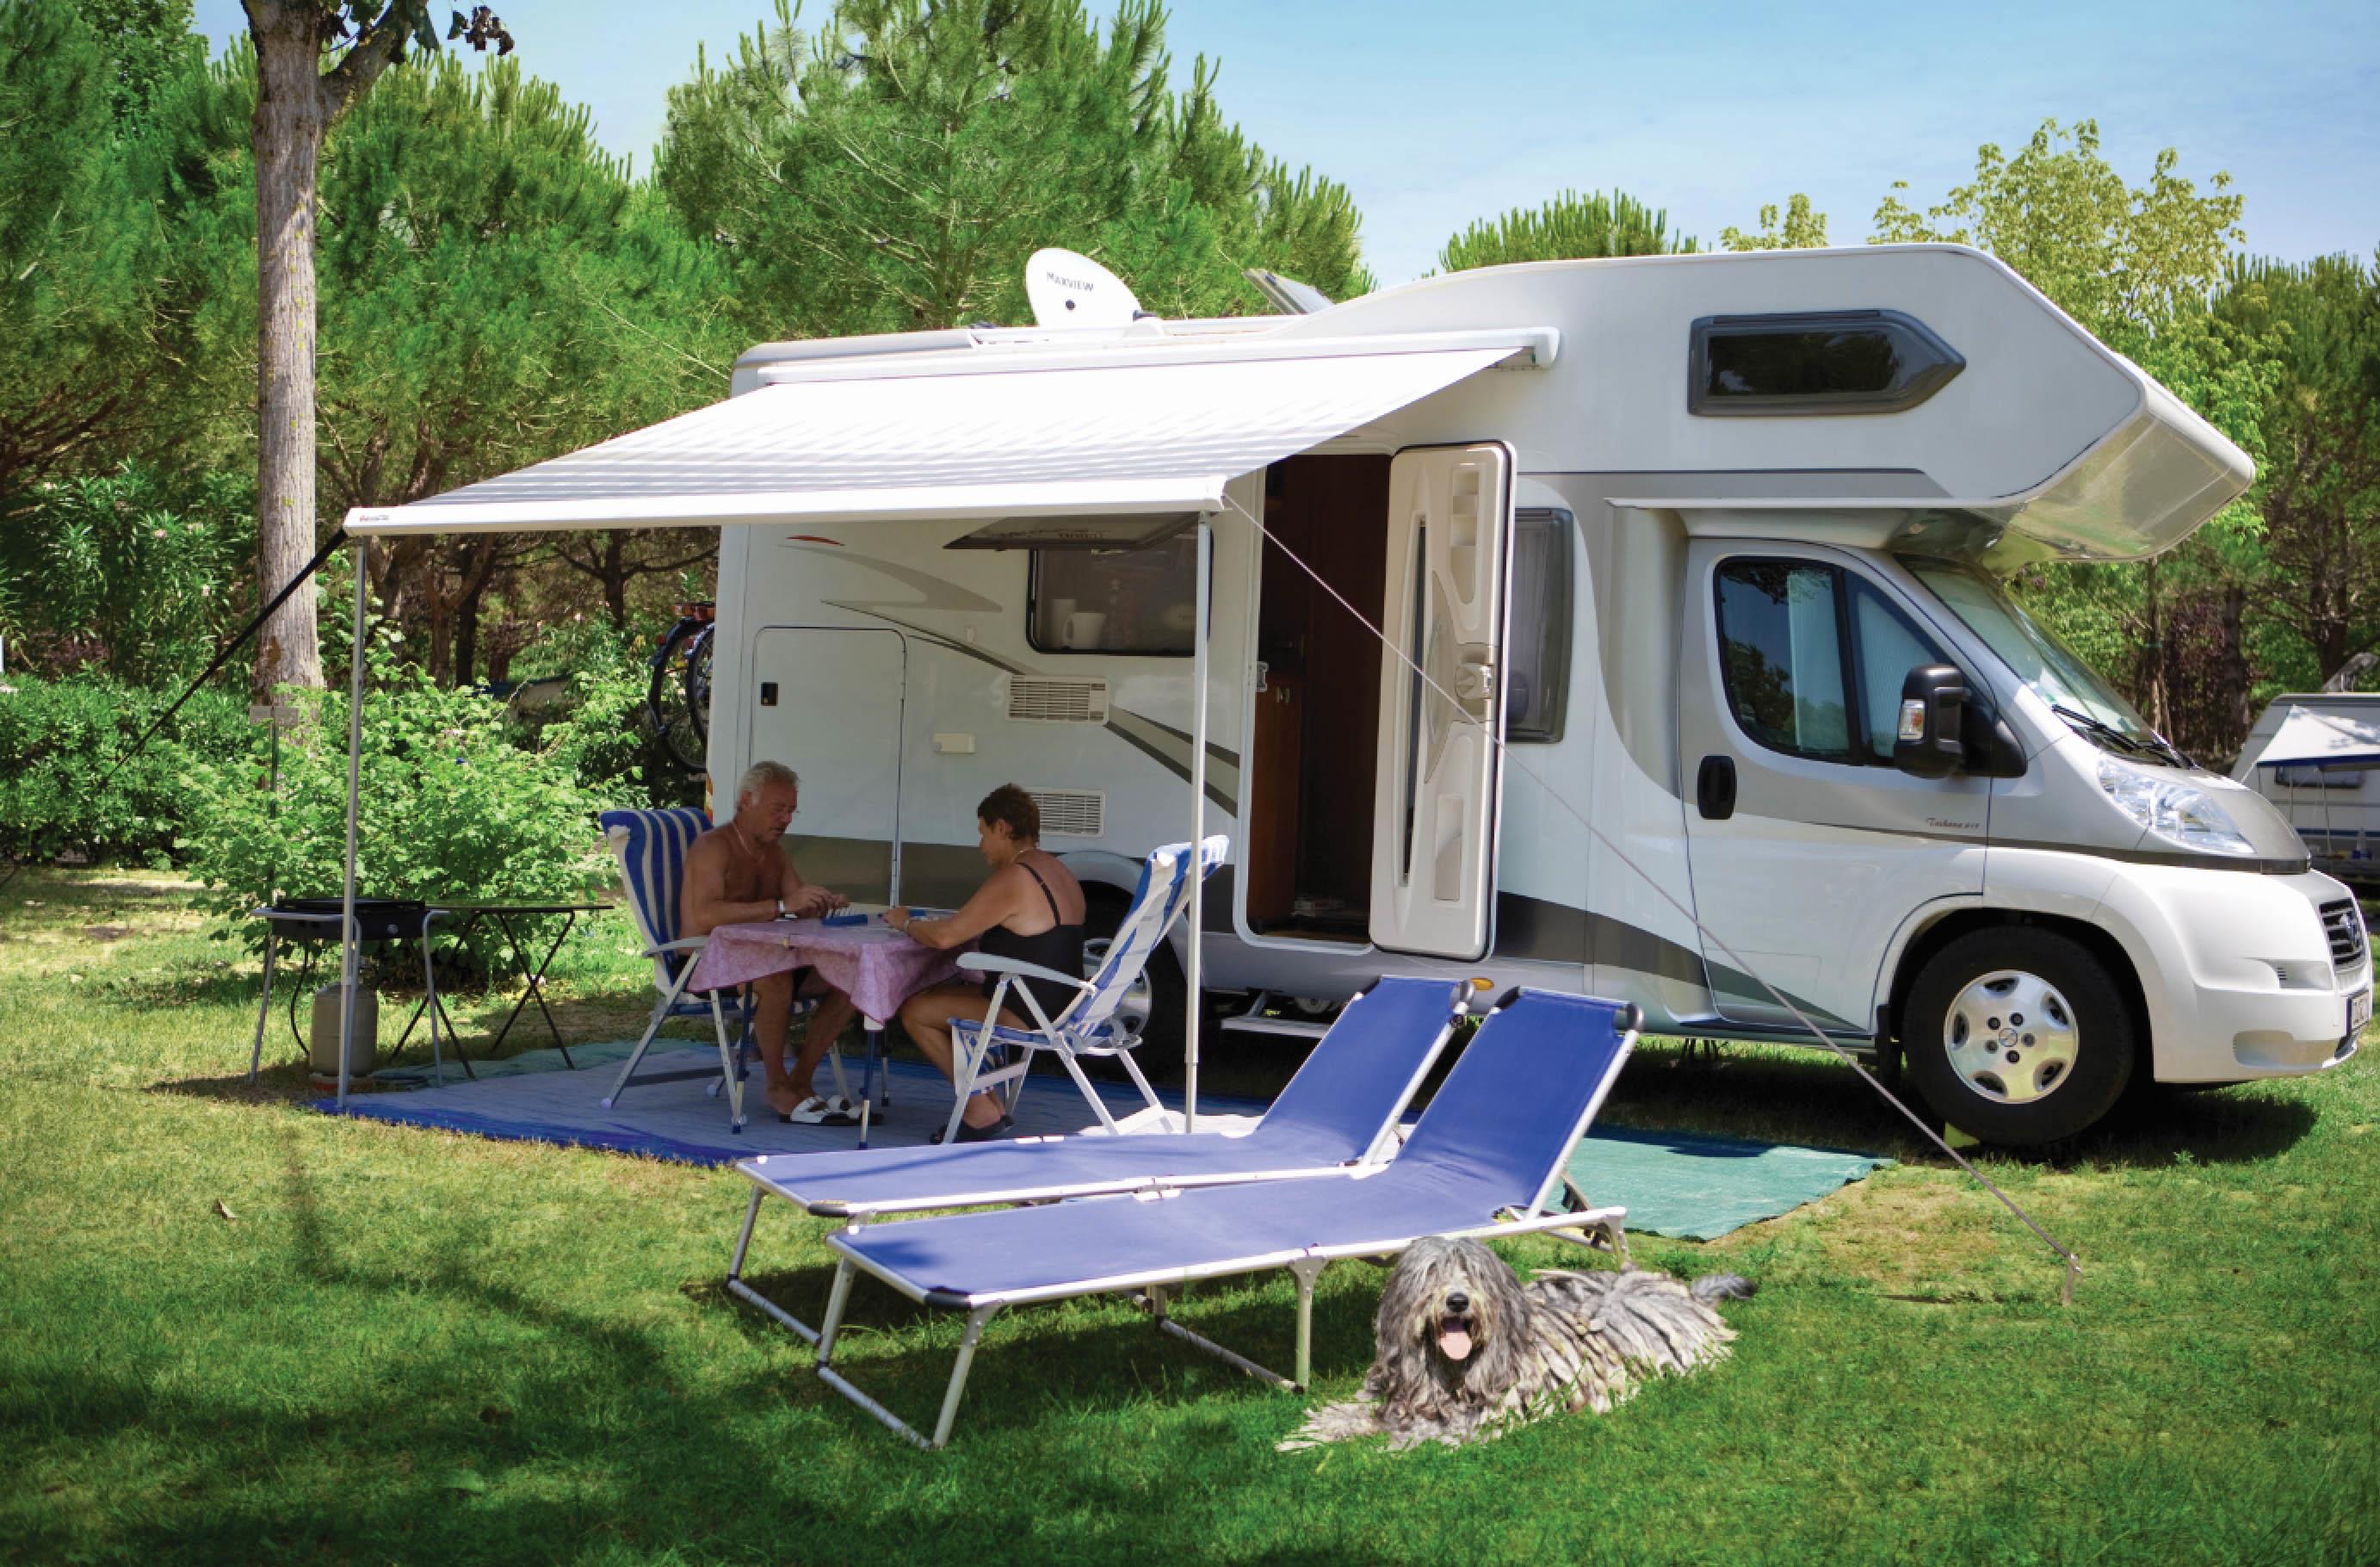 Emplacement - Emplacement Max - Caravane, Camping Car - Union Lido Camping Lodging & Hotel